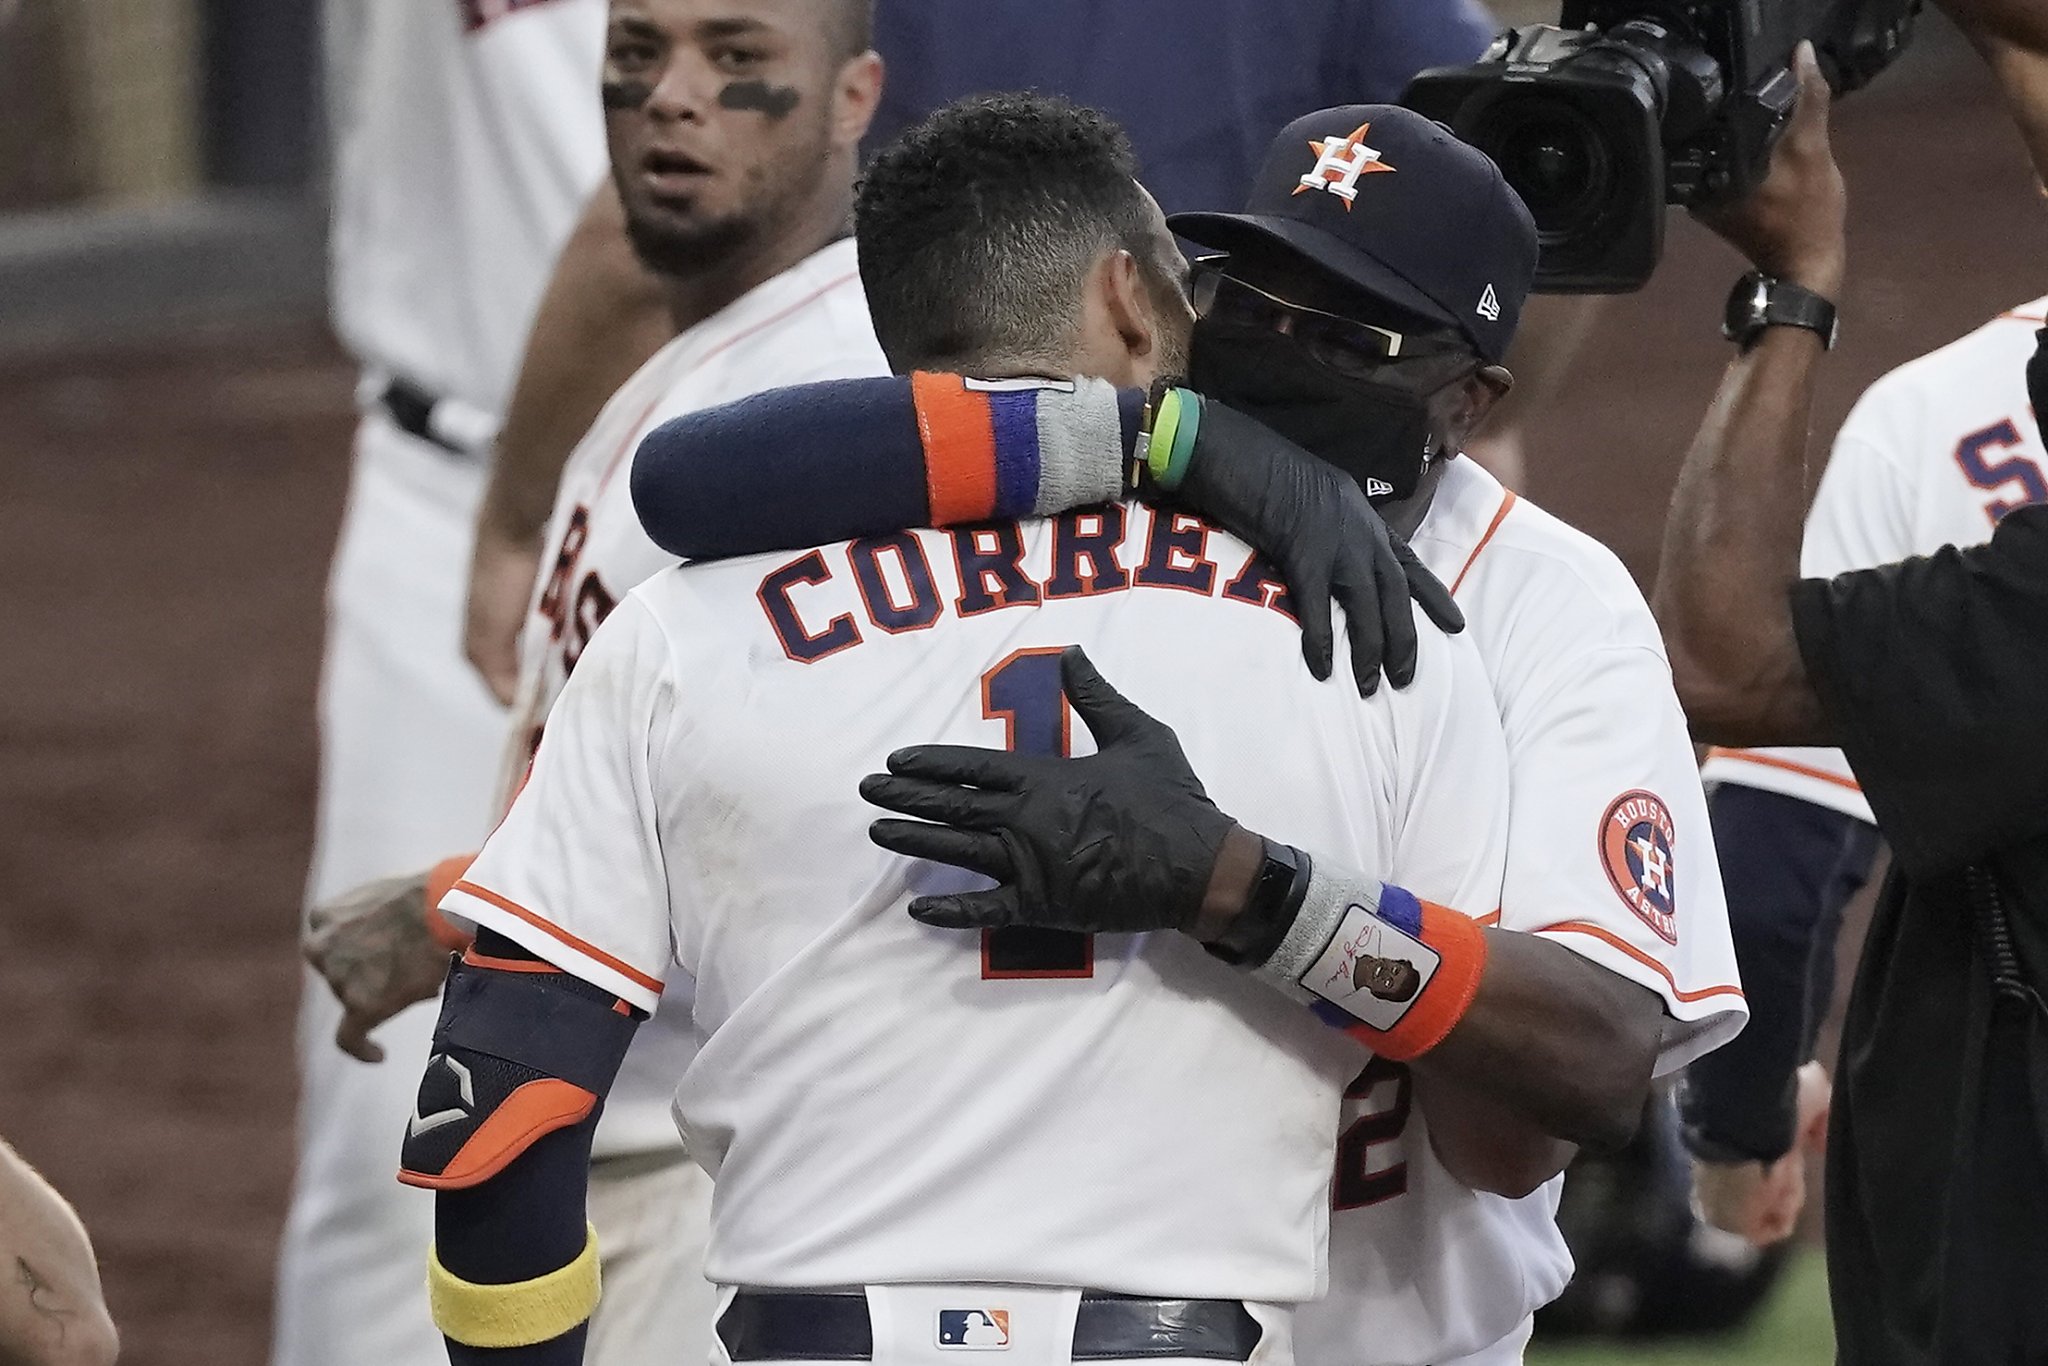 Astros manager Dusty Baker tests positive for COVID-19